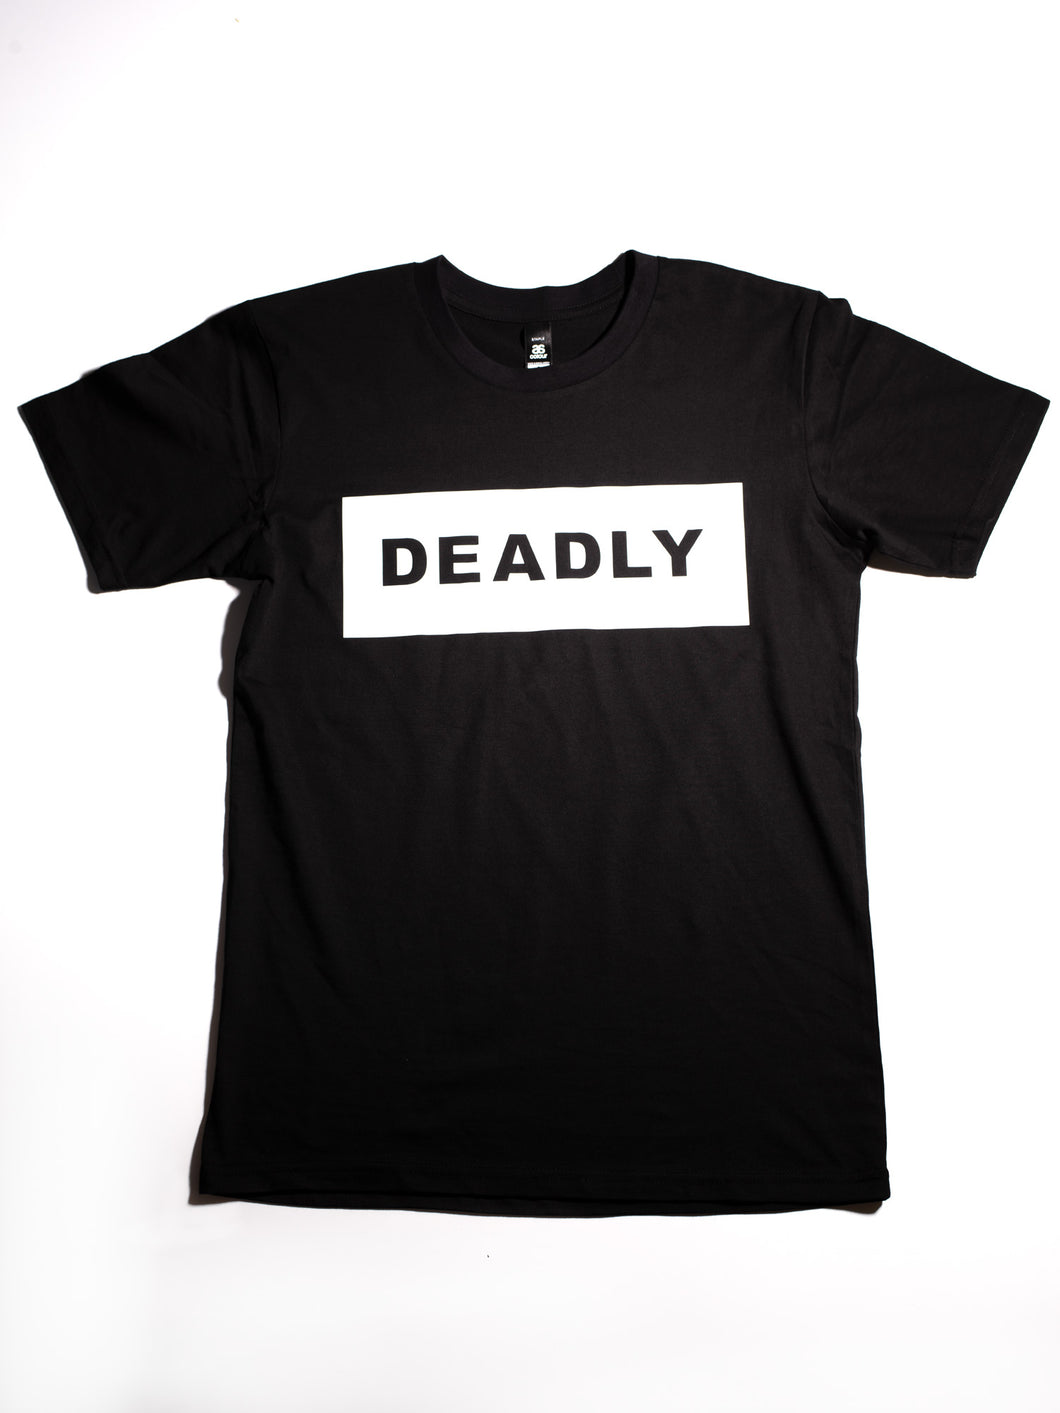 SOLID DEADLY Tee